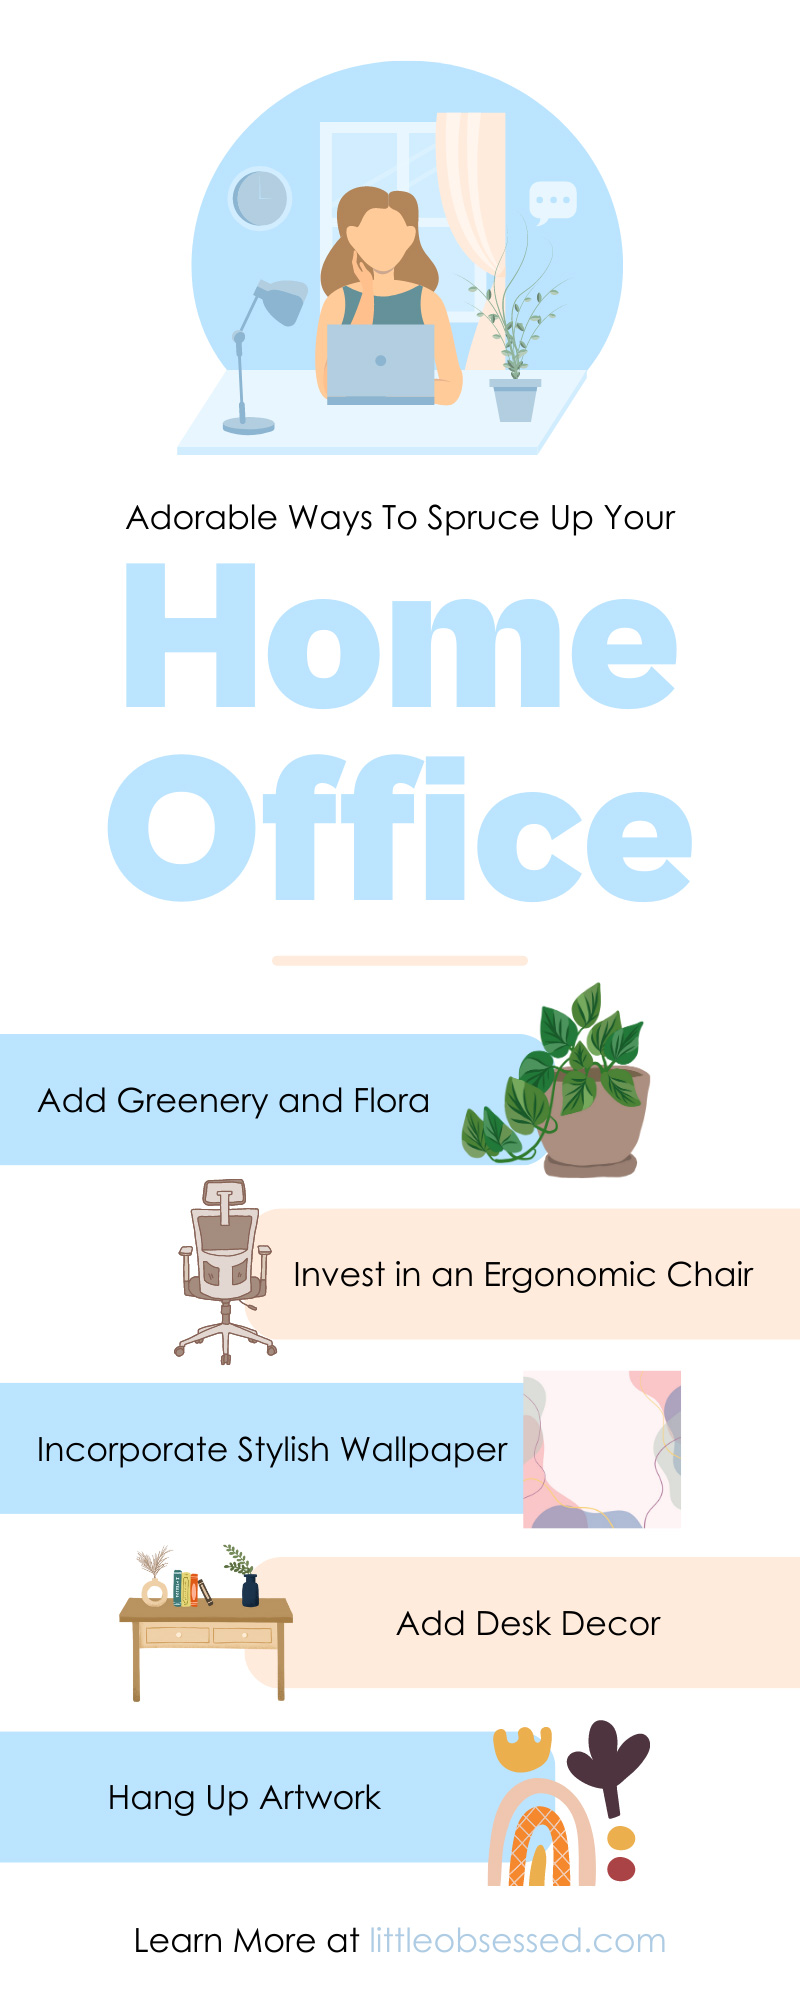 <p>A home office is an excellent way to obtain privacy and hunker down to do your work. However, your office should feel inspiring and encourage creativity. Check out these <strong>adorable ways to spruce up your home office </strong>that will improve your mood and your room’s style.</p><h2>Add Greenery and Flora</h2><p>Did you know that houseplants can help purify the air in your home? If your office lacks life or colors, greenery and flora can make a considerable difference in the mood of your space. You can choose from a multitude of sturdy houseplants, such as succulents, pothos, snake plants, spider plants, jade plants, and many more.</p><p>You can also start an herb garden in your window to grow edible plants and release a delightful scent throughout your office. Flowers and houseplants can enhance the smell of your office, naturally removing odors from the air. Furthermore, they can help improve the mood of your office space considerably. </p><h2>Invest in an Ergonomic Chair</h2><p>When you spend hours at a time focused on work, your body can become compromised due to improper chair support. A stylish ergonomic chair can make a considerable difference in how you feel at the end of the day, as it provides proper support so you don’t have to adjust your body throughout the day.</p><p>Not only are ergonomic chairs helpful in improving your focus and how you feel, but they can also visually enhance the look of your office space. You can choose from many styles and colors, from neutral shades to brighter, eye-catching hues. While ergonomic chairs can come with a higher price tag, a comfortable place to sit is worth the investment.</p><h2>Provide Additional Seating for Guests</h2><p>While your home office offers privacy so you can focus on everyday tasks, you might have a visitor from time to time. If coworkers come to your home office for work purposes, additional seating can add style to your space and help your colleagues feel more comfortable. Many guest seating options are stylish and sleek, especially when paired with a coffee table or end tables.</p><p>Consider the type of seating you want to provide for visitors. Do you want to add a couple of comfortable chairs, or would you prefer a small couch? Is additional seating necessary for your office space? Do you have visitors often? If so, extra seating is an incredibly considerate option that also enhances the professionalism of your office.</p><h2>Incorporate Stylish Wallpaper</h2><p>One benefit of having an at-home office is making the room completely your own. If you have dull walls, you can brighten them with eye-catching, artistic wallpaper. Choose a wallpaper style that suits your tastes and interests, from different color combinations to unique patterns.</p><p>You can opt for stick-on wallpaper, wood wallpaper, vinyl, textured wallpaper, or another choice for the perfect addition to your office space. The possibilities are limitless, with options including animal print, floral and greenery, patterns, glittery or reflective styles, solid colors, and more. You can make one wall your office’s focal piece or background accent to match your room’s overall theme perfectly.</p><h2>Add Desk Decor</h2><p>If your work desk currently only has a notebook and a computer, you can go above and beyond to make it visually captivating. If you love stationery and taking notes, you can find colorful, themed writing supplies to help you feel more inspired as you work. For instance, choosing writing supplies, such as pens, pencils, notepads, erasers, pencil holders, organizers, sticky tabs, and more, with the same colors or patterns can make your desk appear more organized and cohesive.</p><p>Furthermore, adding desk decor can help with everyday stressors while keeping your desk looking more filled out. You can find miniature Zen gardens, greenery, calendars, diffusers, fidget toys, and other goodies to help brighten your desk space. Small additions to your desk can help bring a touch of your personality into your office.</p><h2>Hang Up Artwork</h2><p>A home office should always have personality. You can transform a drab, uninteresting office into a flashy, visually impressive one by adding wall art and decor. Determine your theme and layout before installing any of your art pieces so you can keep things cohesive and exciting.</p><p>There are many themes to choose from to make your home office stand out. You can even use a painting, wallpaper, or a specific piece of decor as a focal point to center your entire office around. Decorating your office is a perfect opportunity to be creative and think outside the box.</p><h2>Take Time To Clean Up</h2><p>As time passes, your home office can become dirty and dusty or accumulate debris. If your office has become more cluttered than usual, take time out of your schedule to create a cleaning routine. Your office will look better because of it, and you’ll feel better as you sit down to focus on work.</p><p>If you live with allergies, cleaning up dust and other contaminants can help reduce allergic reactions. Also, bringing clients or employees to your home office will feel less nerve-wracking when you maintain a clean, organized space. Take the time to manage files, optimize your computer, dust surfaces, clean up spills, and put away unnecessary items.</p><h2>Make the Flooring Cozy and Soft</h2><p>Replacing the flooring in your home office can be time-consuming and expensive. Instead of replacing the flooring, invest in a beautiful center rug and accent rugs to give your floor visual interest. There are many rug options available, including animal print, geometric, floral, distressed, faux fur, and many more.</p><p>Adding rugs is not only an <strong>adorable way to spruce up your home office</strong>, but it also provides comfort and coziness. If you have hardwood flooring, a plush rug can help prevent tired, aching feet. It also gives you a different place to sit if you want a break from working at your desk. You can place a coffee table and a meditation pillow on your rug and enjoy a break by stretching your legs.</p><p>Whether you’re looking to redecorate your office or gift small goodies to friends or loved ones, Little Obsessed offers the best miniature gifts. We specialize in small, unique items that considerably impact someone’s life, making them the perfect gifts for an array of occasions. Also, our <a href="https://www.littleobsessed.com/desk-accessories/">mini desk items</a> make wonderful additions to your desk—from miniature Zen garden kits to tiny house box calendars, you’ll find exactly what you’re looking for. If you have any questions about our miniature items and goodies, feel free to reach out.</p>